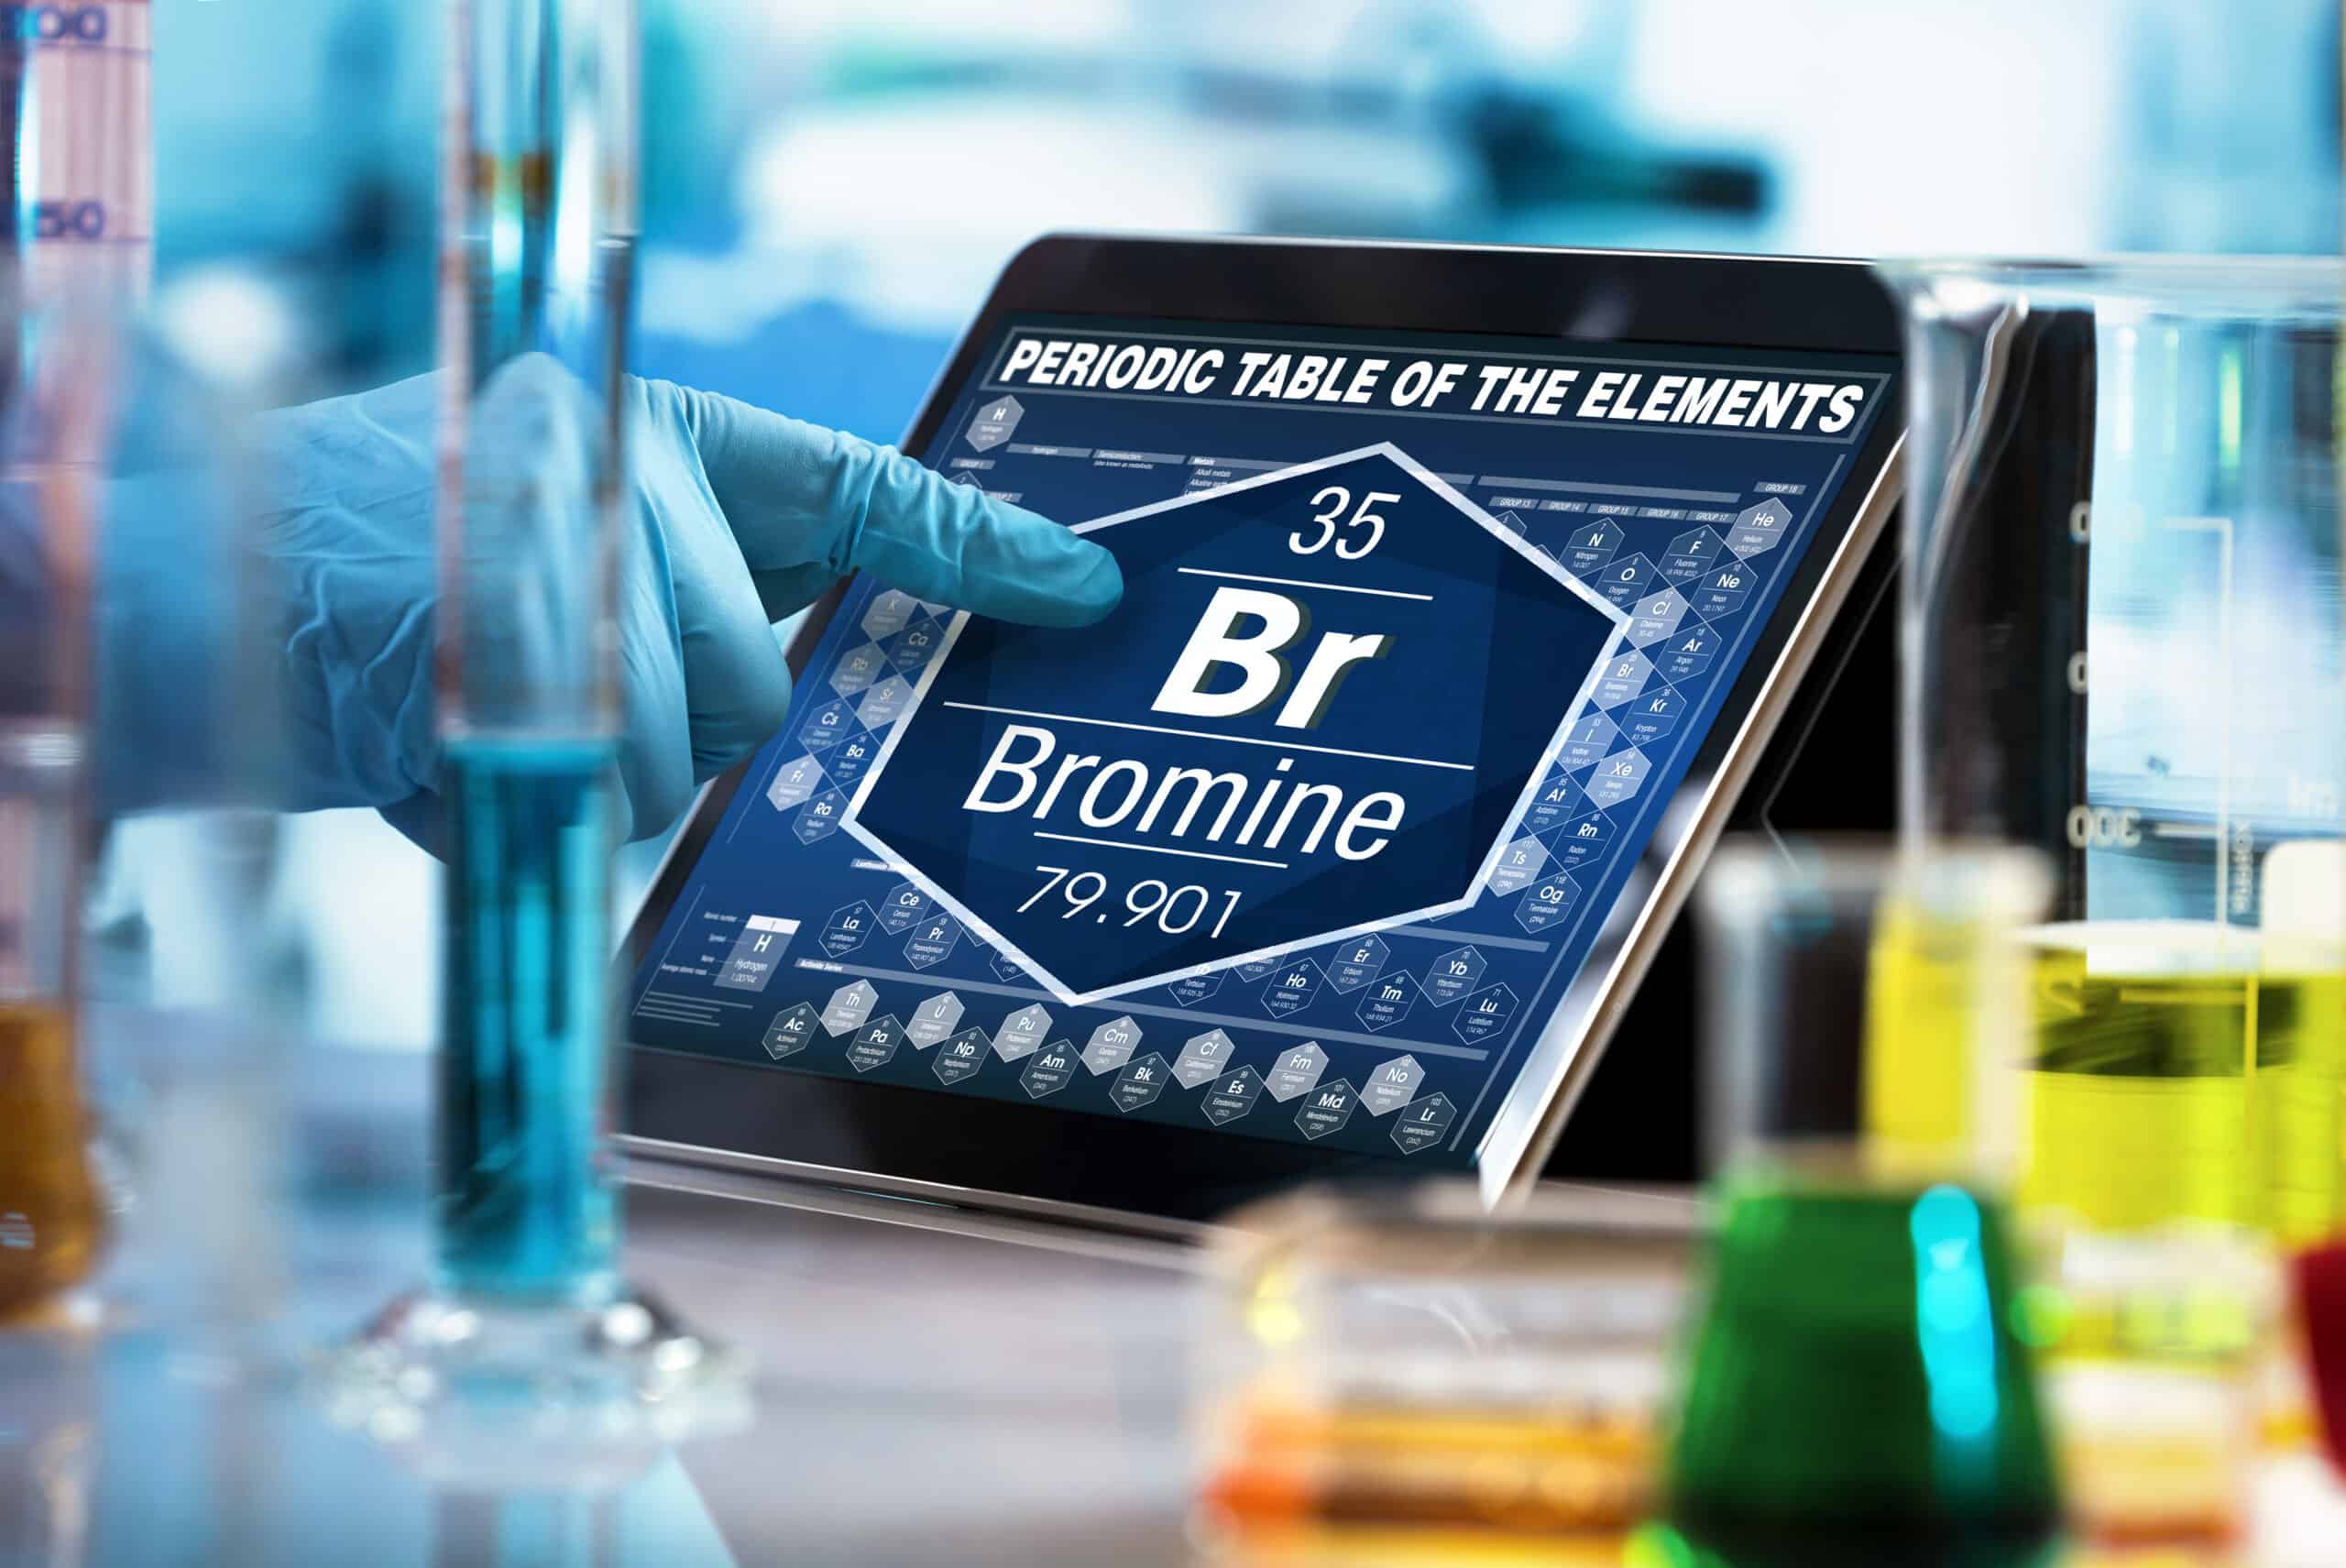 Can I use bromine in my salt water pool?